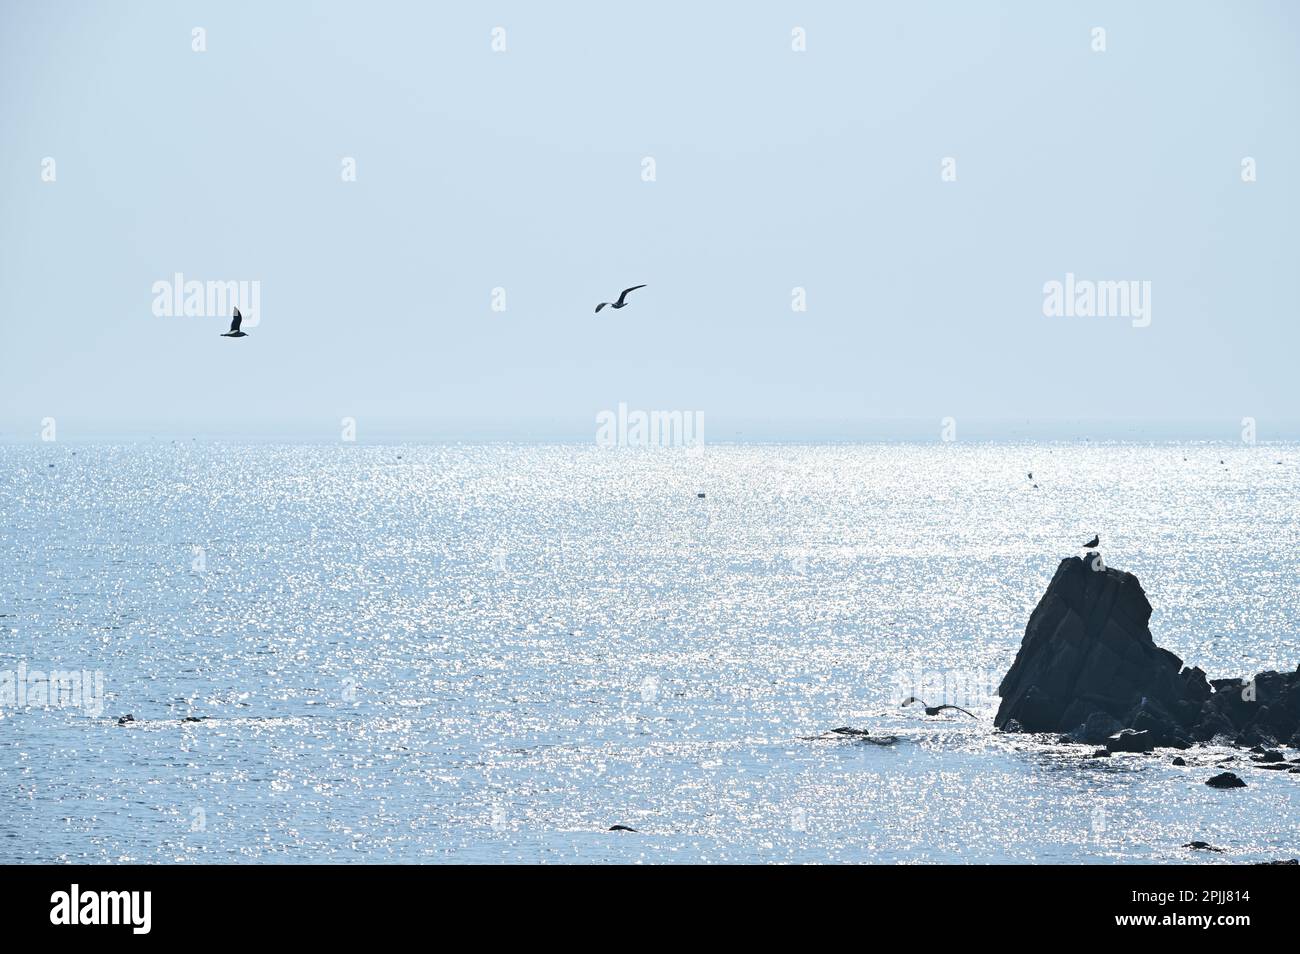 There are rocks in the shining sea and seagulls fly around Stock Photo